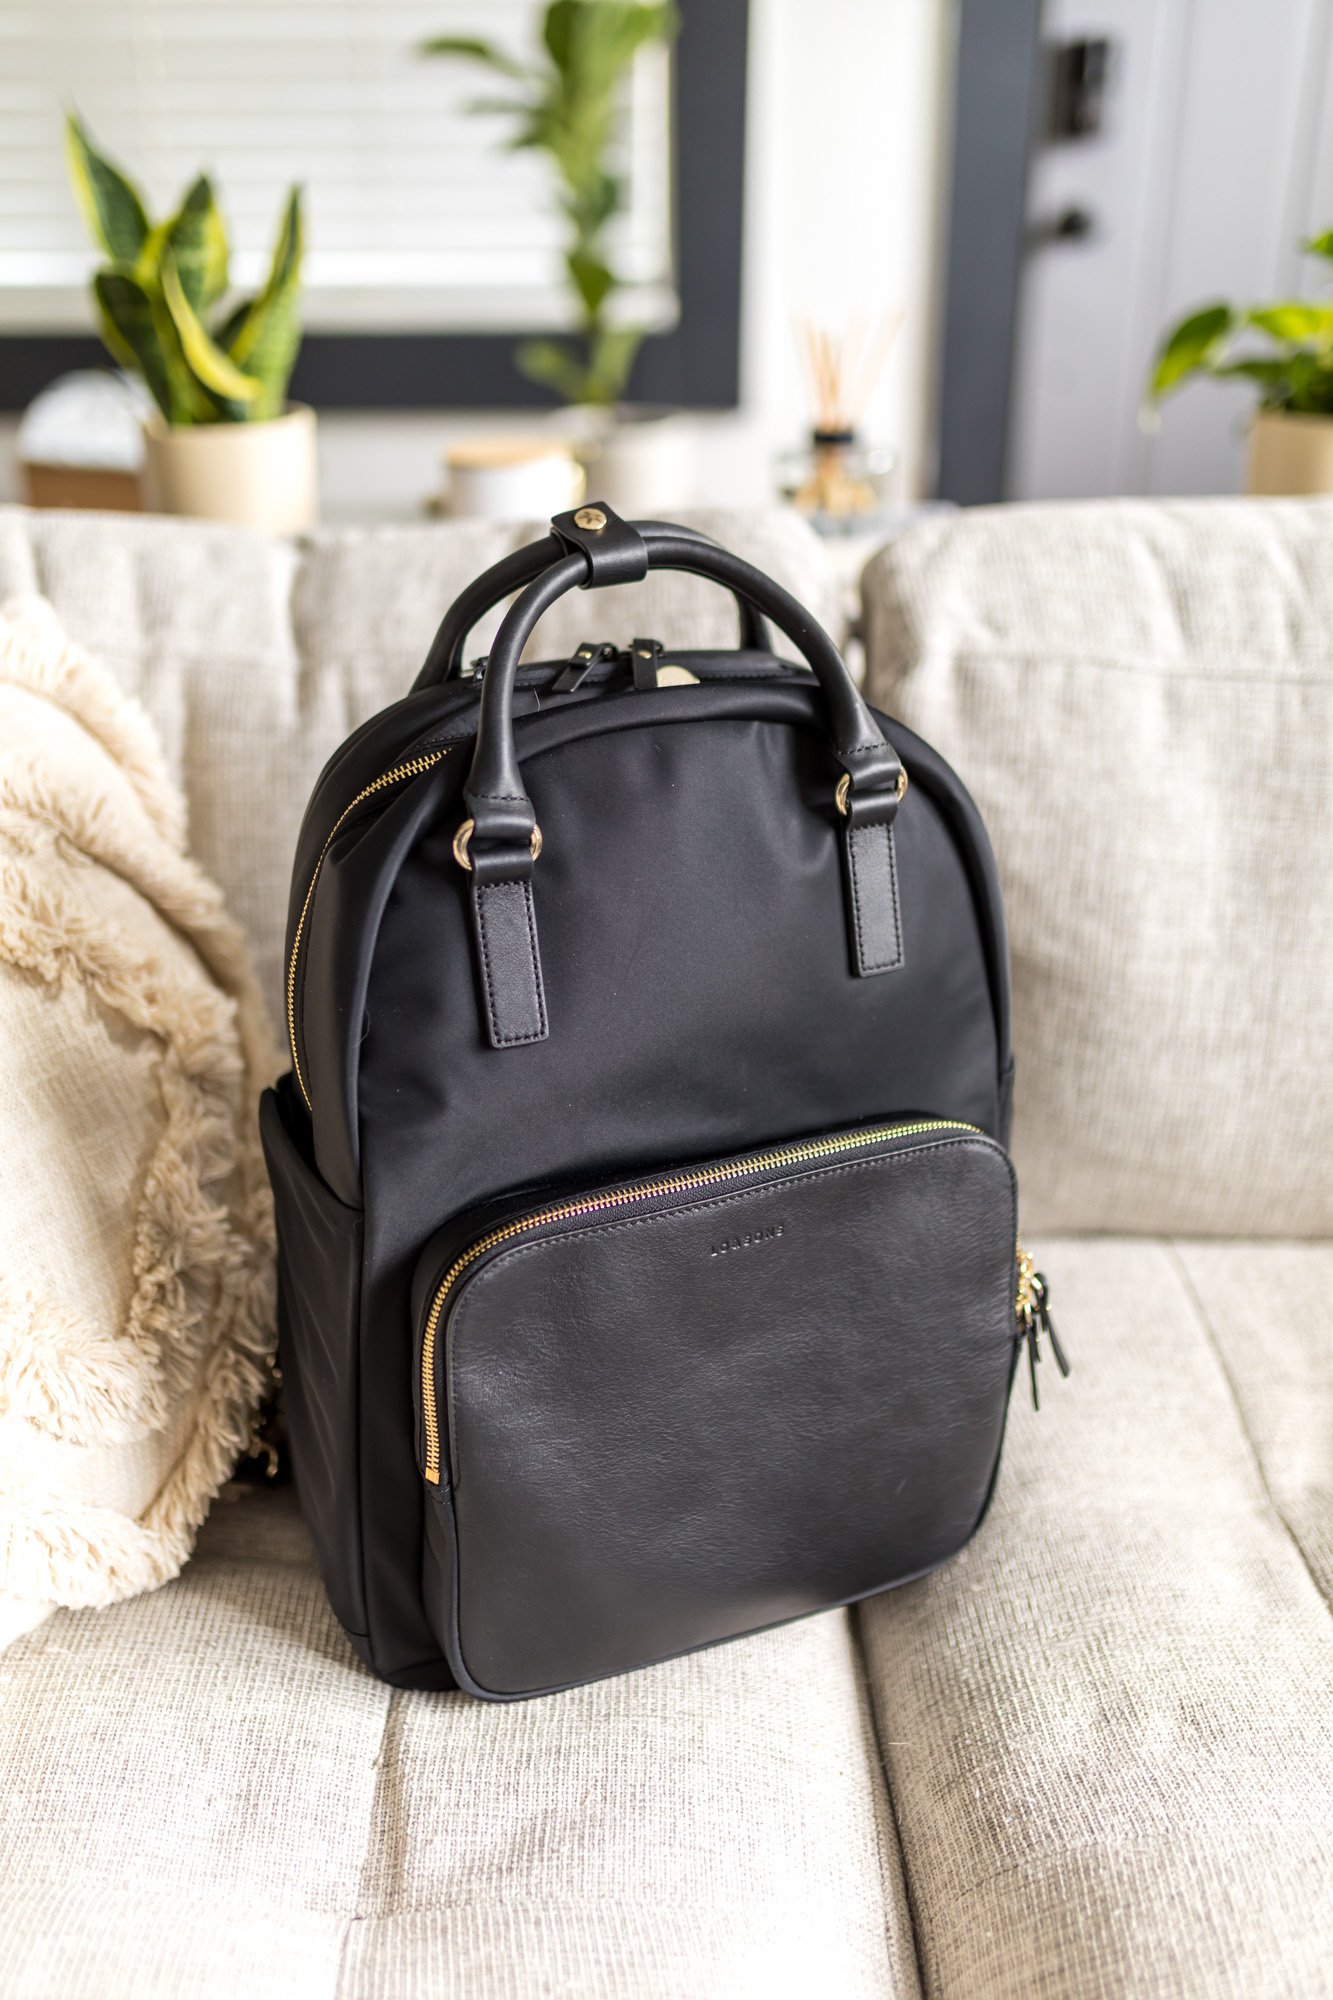 Lo & Sons Rowledge Review - The Stylish Women's Laptop Backpack 